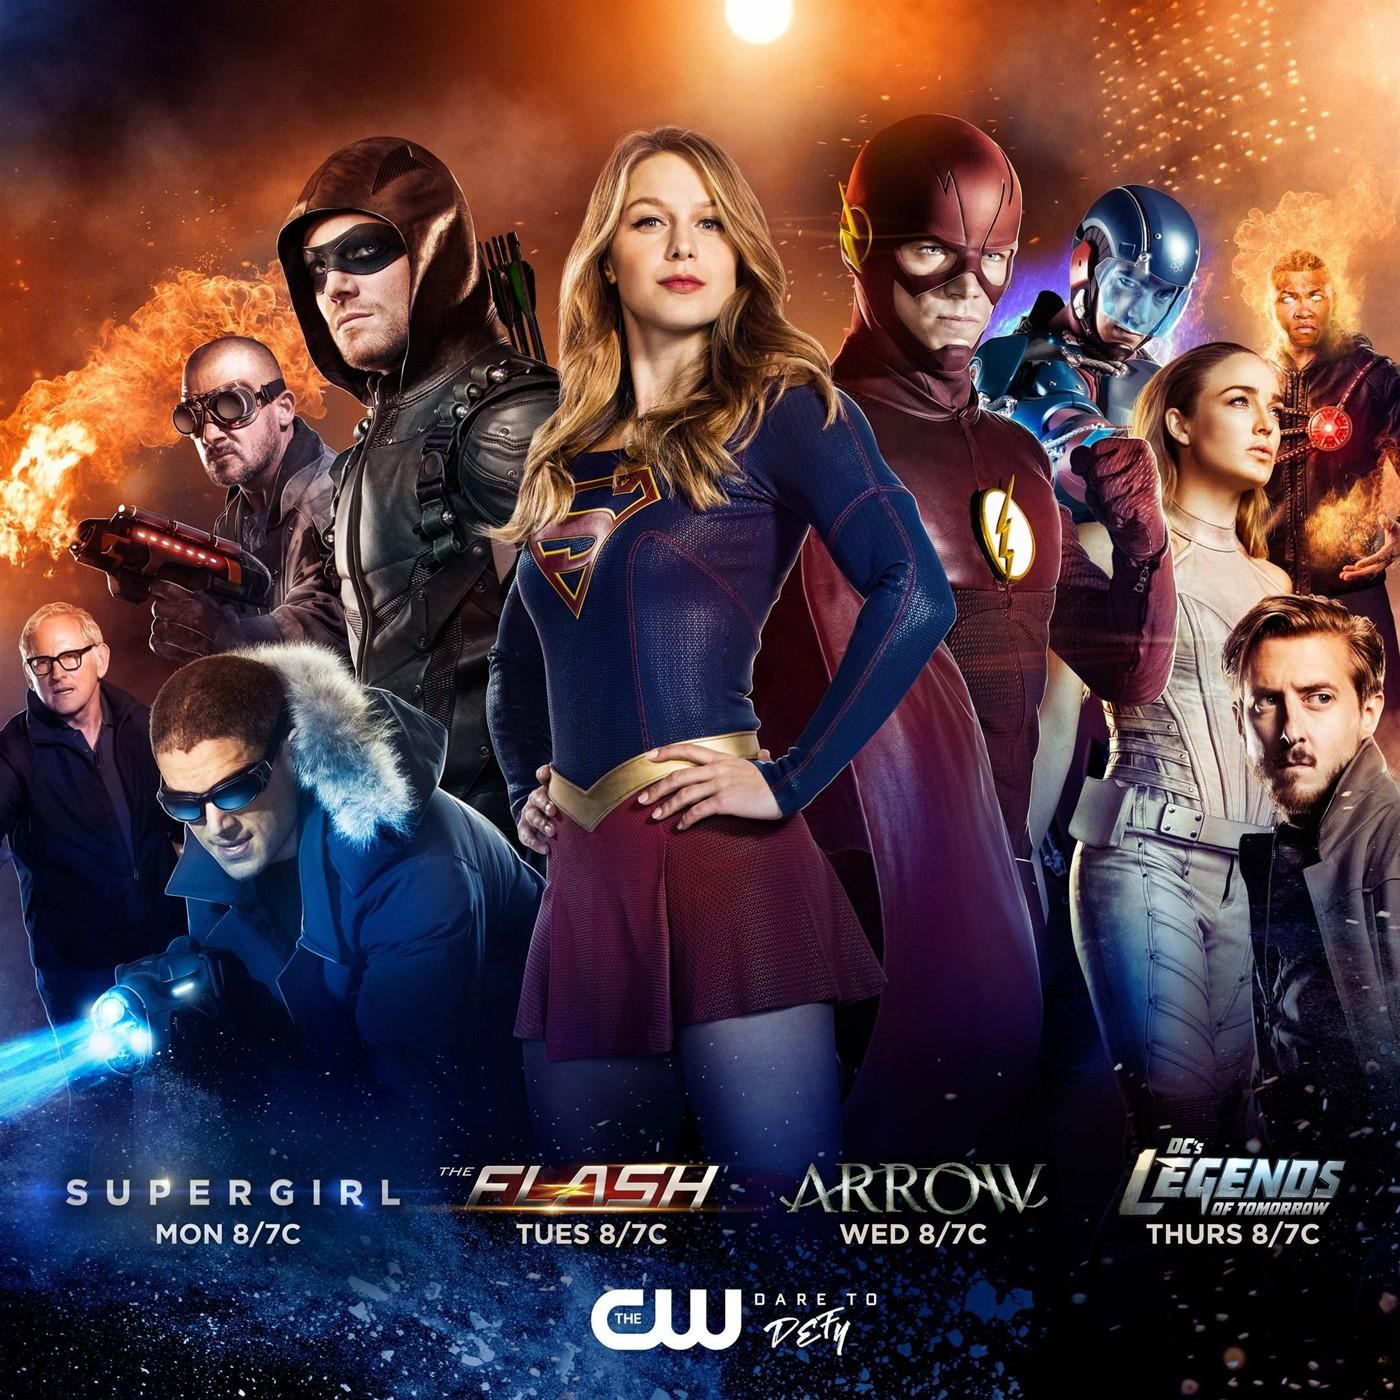 Return to the Arrowverse